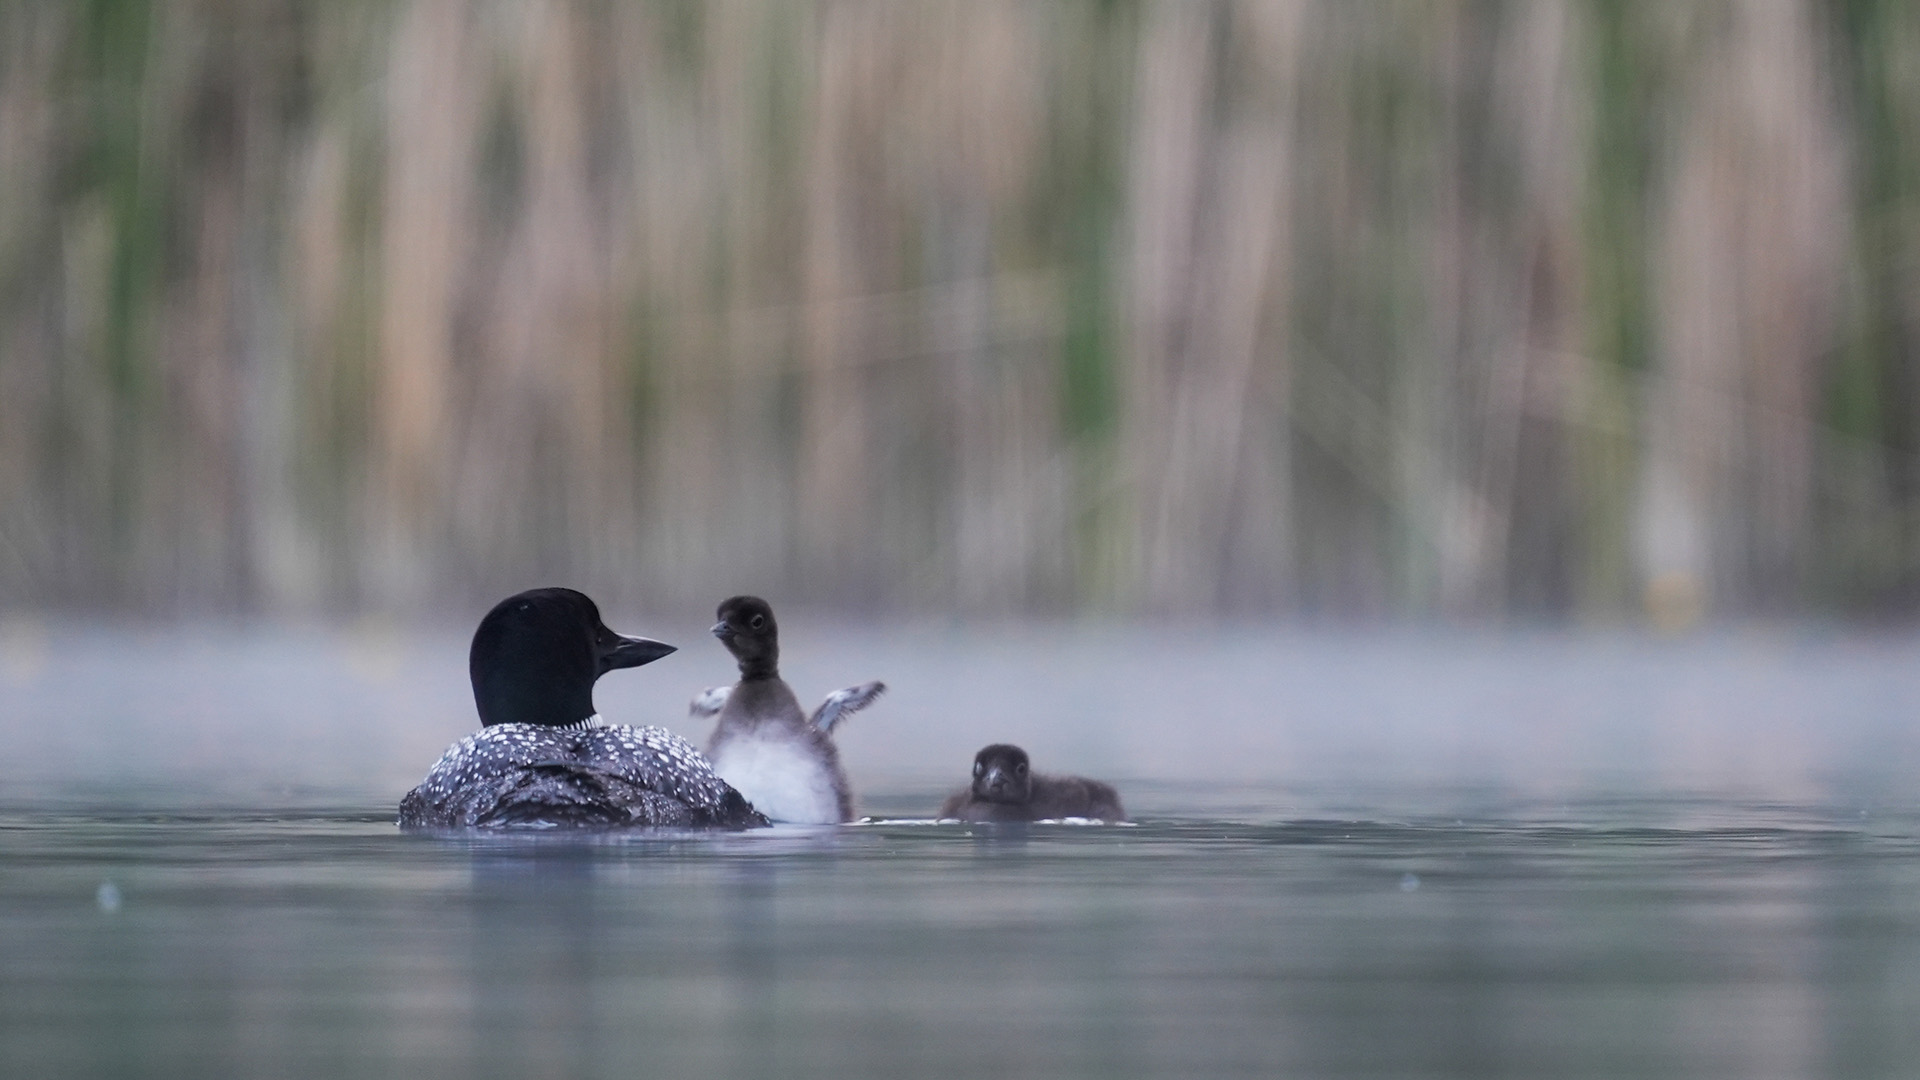 Loon chicks with their parents. This is from America's National Parks. [Photo of the day - September 2022]